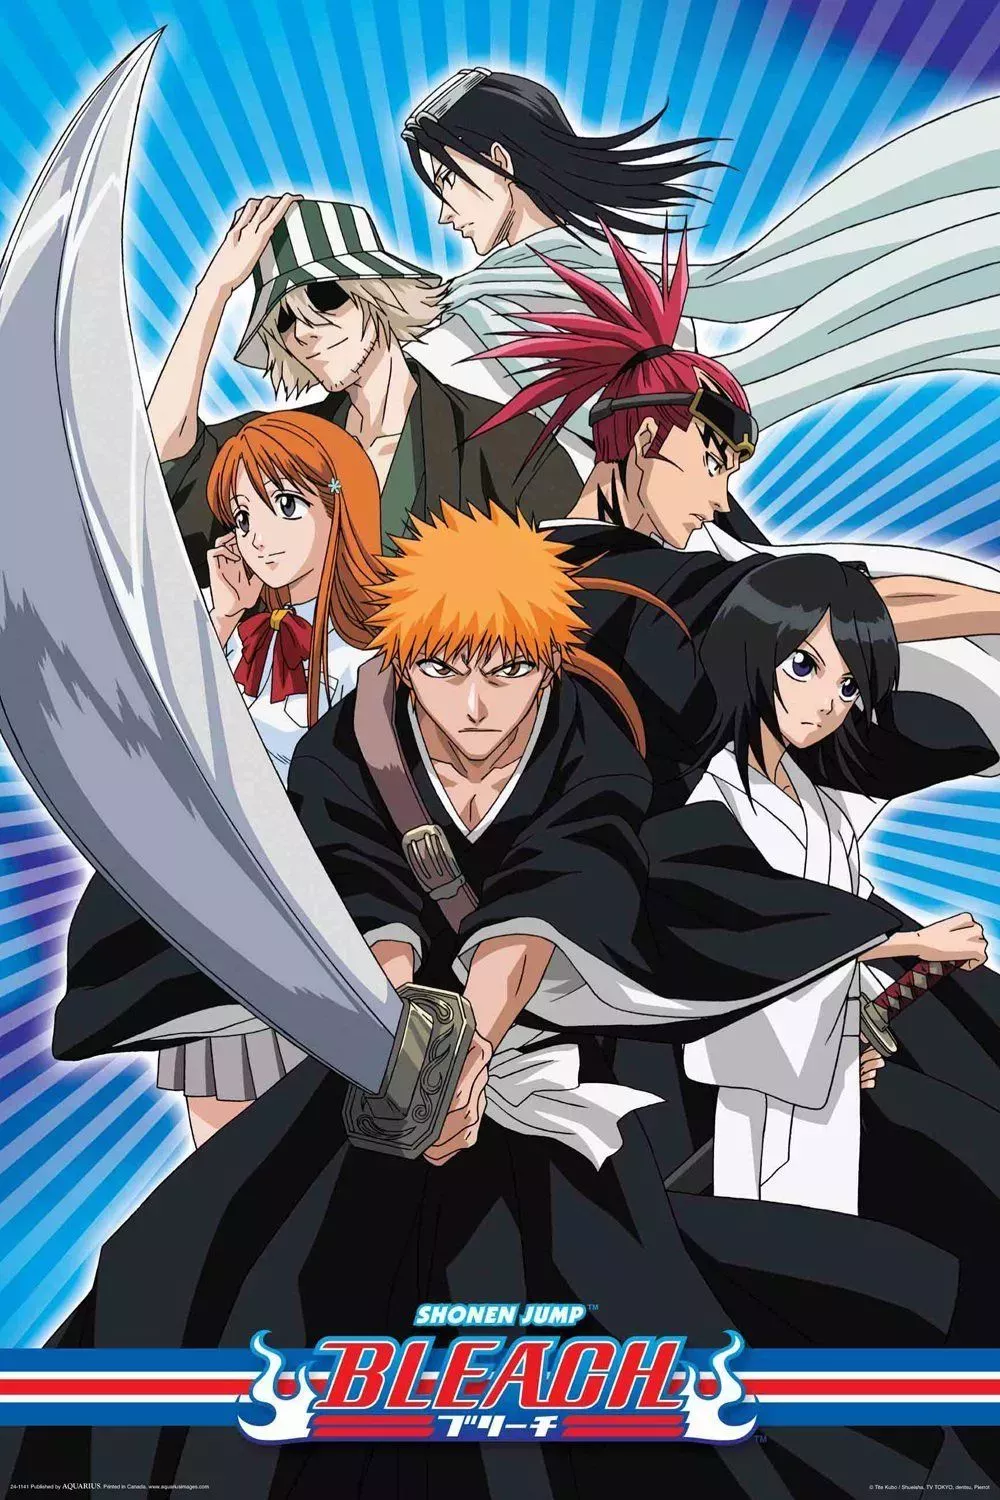 Ichigo Kurosaki ready to fight with cast of characters in Bleach Anime Poster